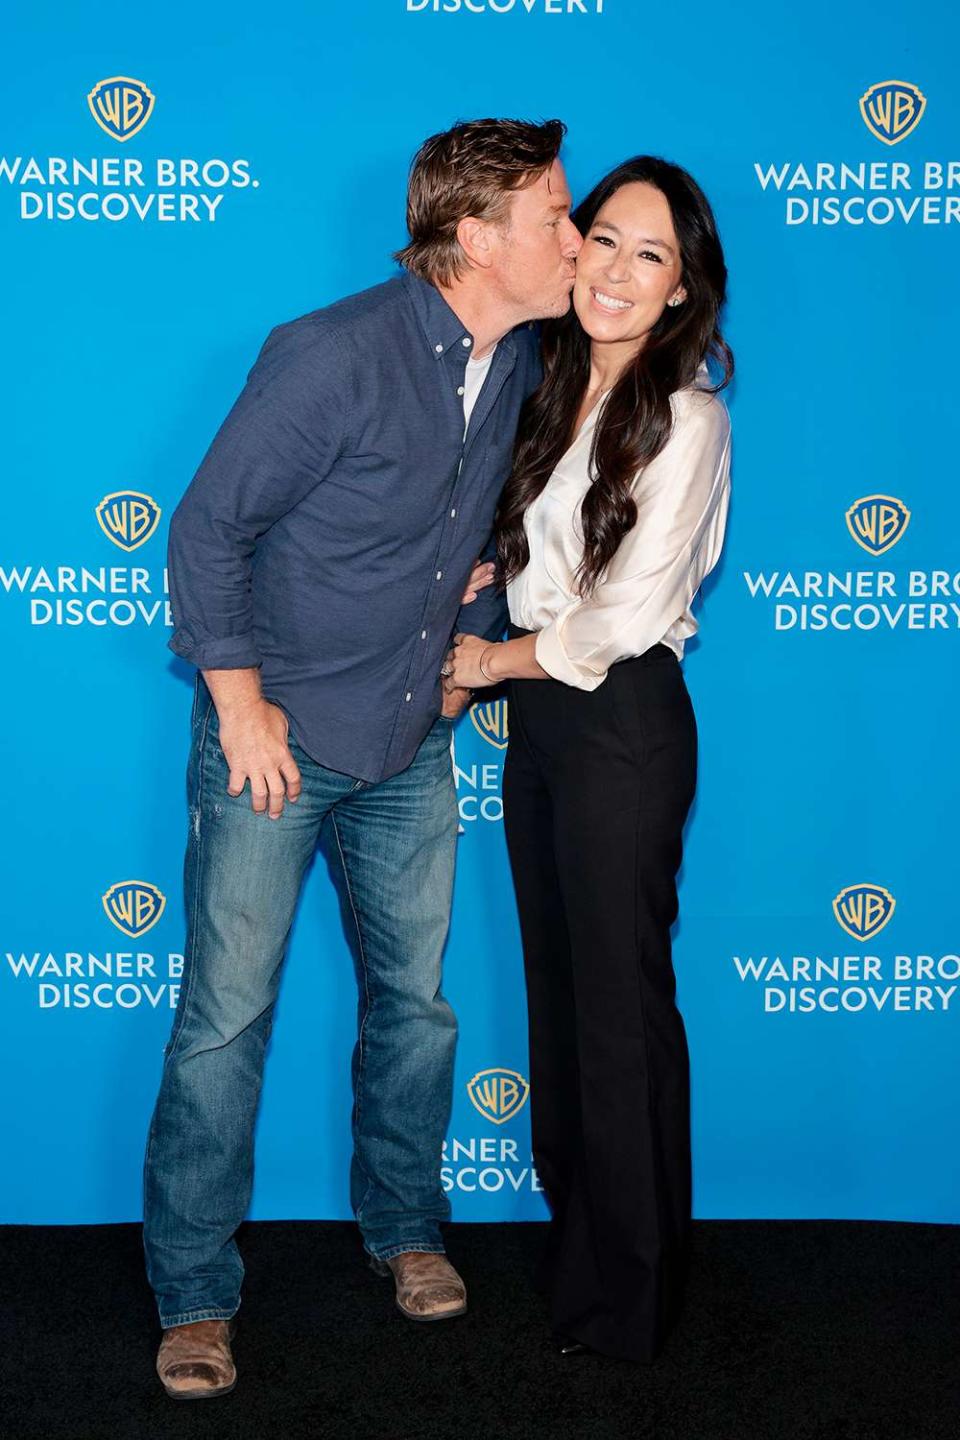 Chip Gaines, Fixer Upper on Magnolia and Joanna Gaines, Fixer Upper on Magnolia attend the Warner Bros. Discovery Upfront 2022 arrivals on the red carpet at MSG Studios on May 18, 2022 in New York City